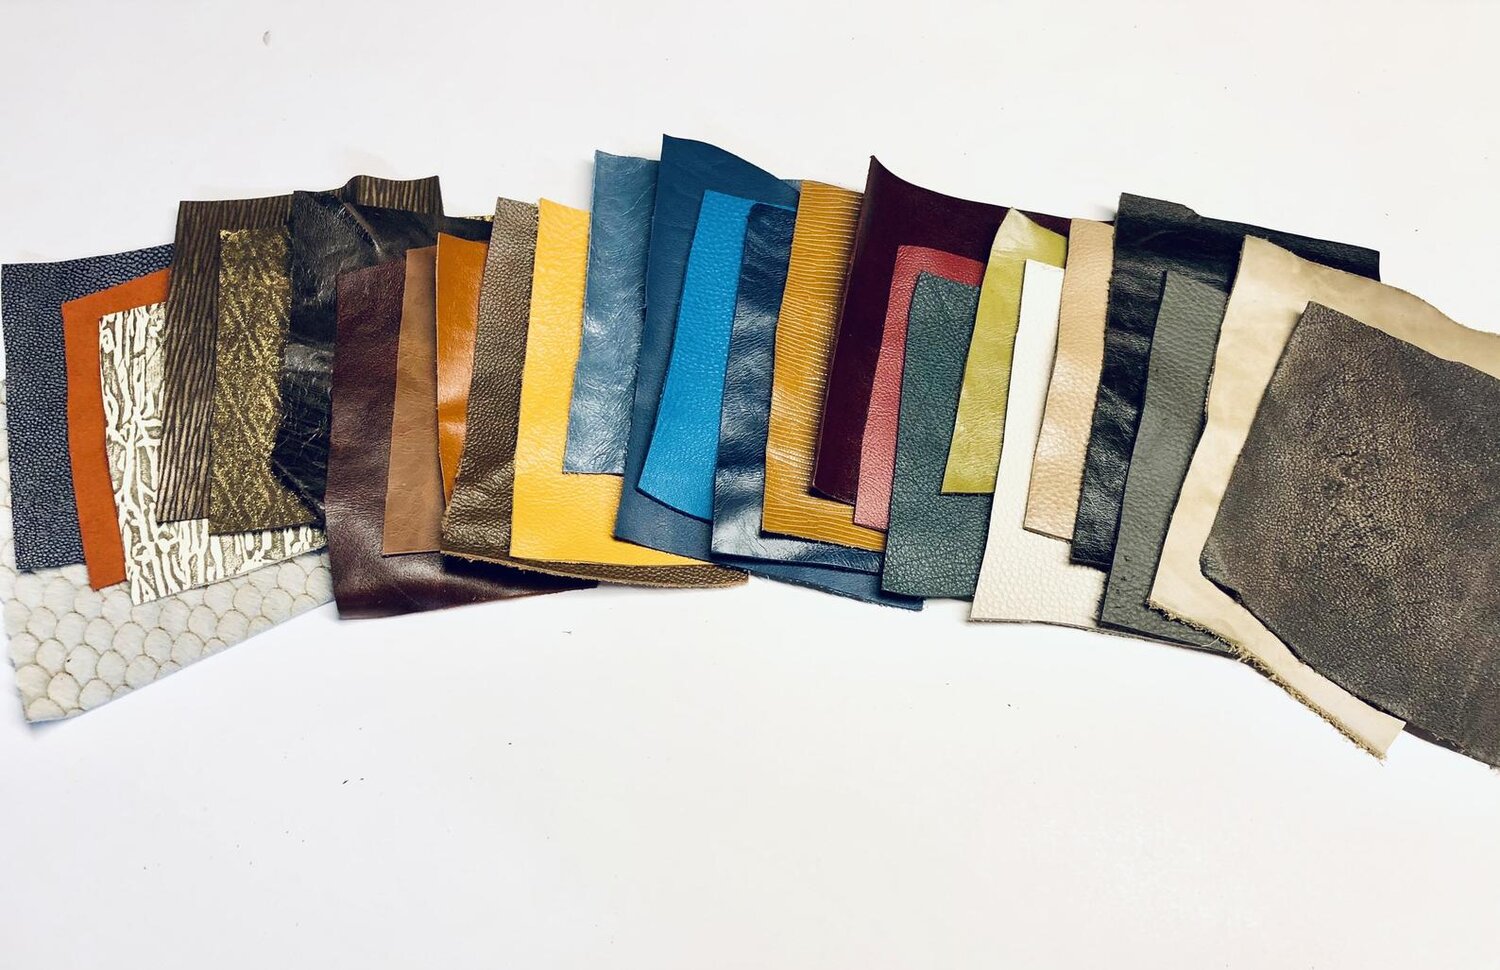 Colorful Leather Pieces - 1 Pound Bag of Scraps & Remnants for